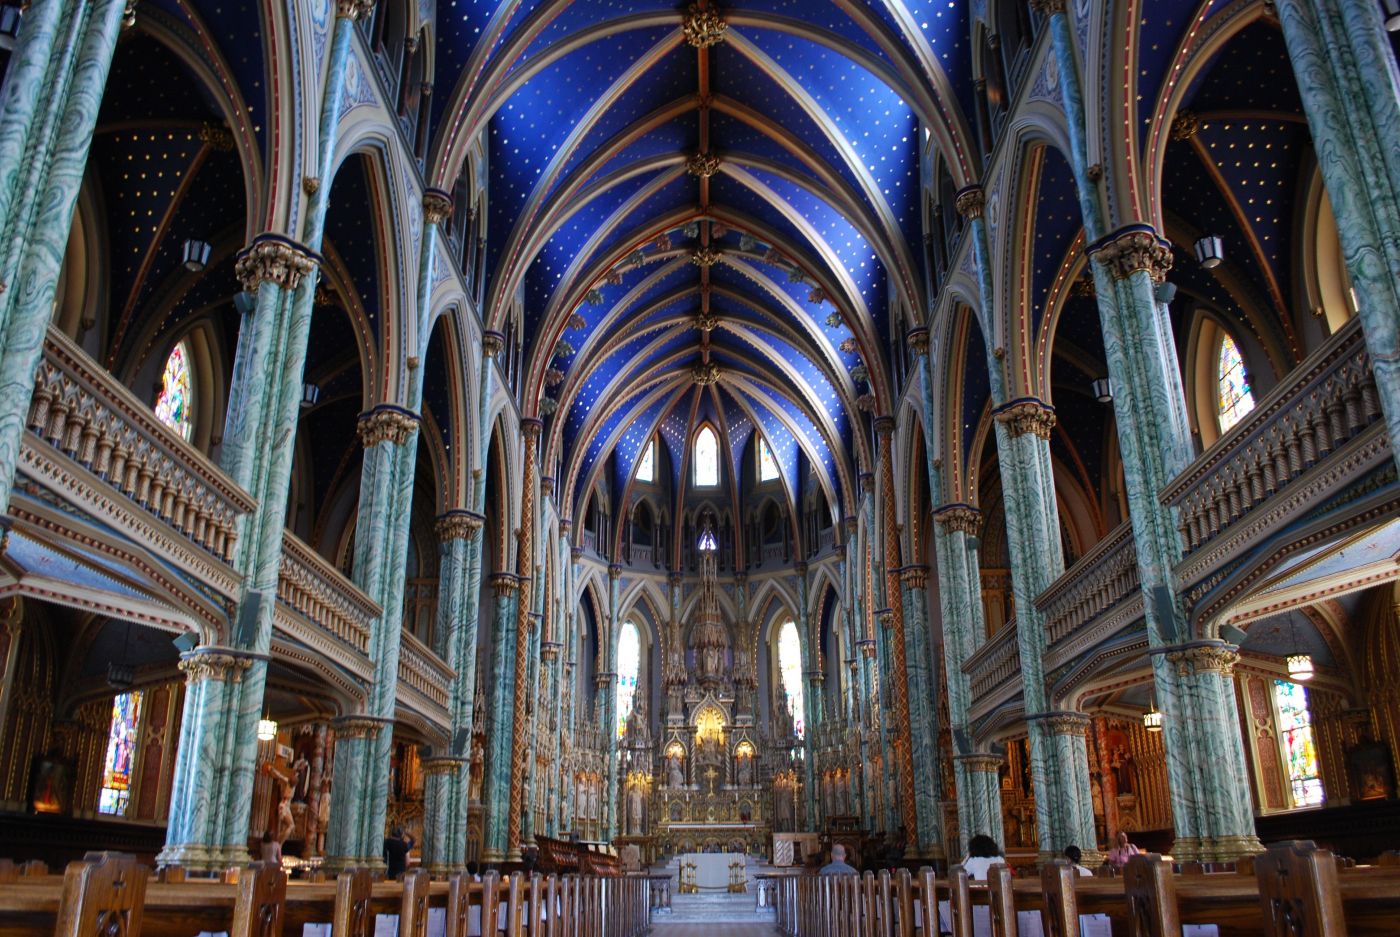 Colour photograph of the interior of a neo-Gothic-style church. Columns of green and white marble line the nave on each side. The vaulted ceiling is painted blue. The sanctuary is richly carved.